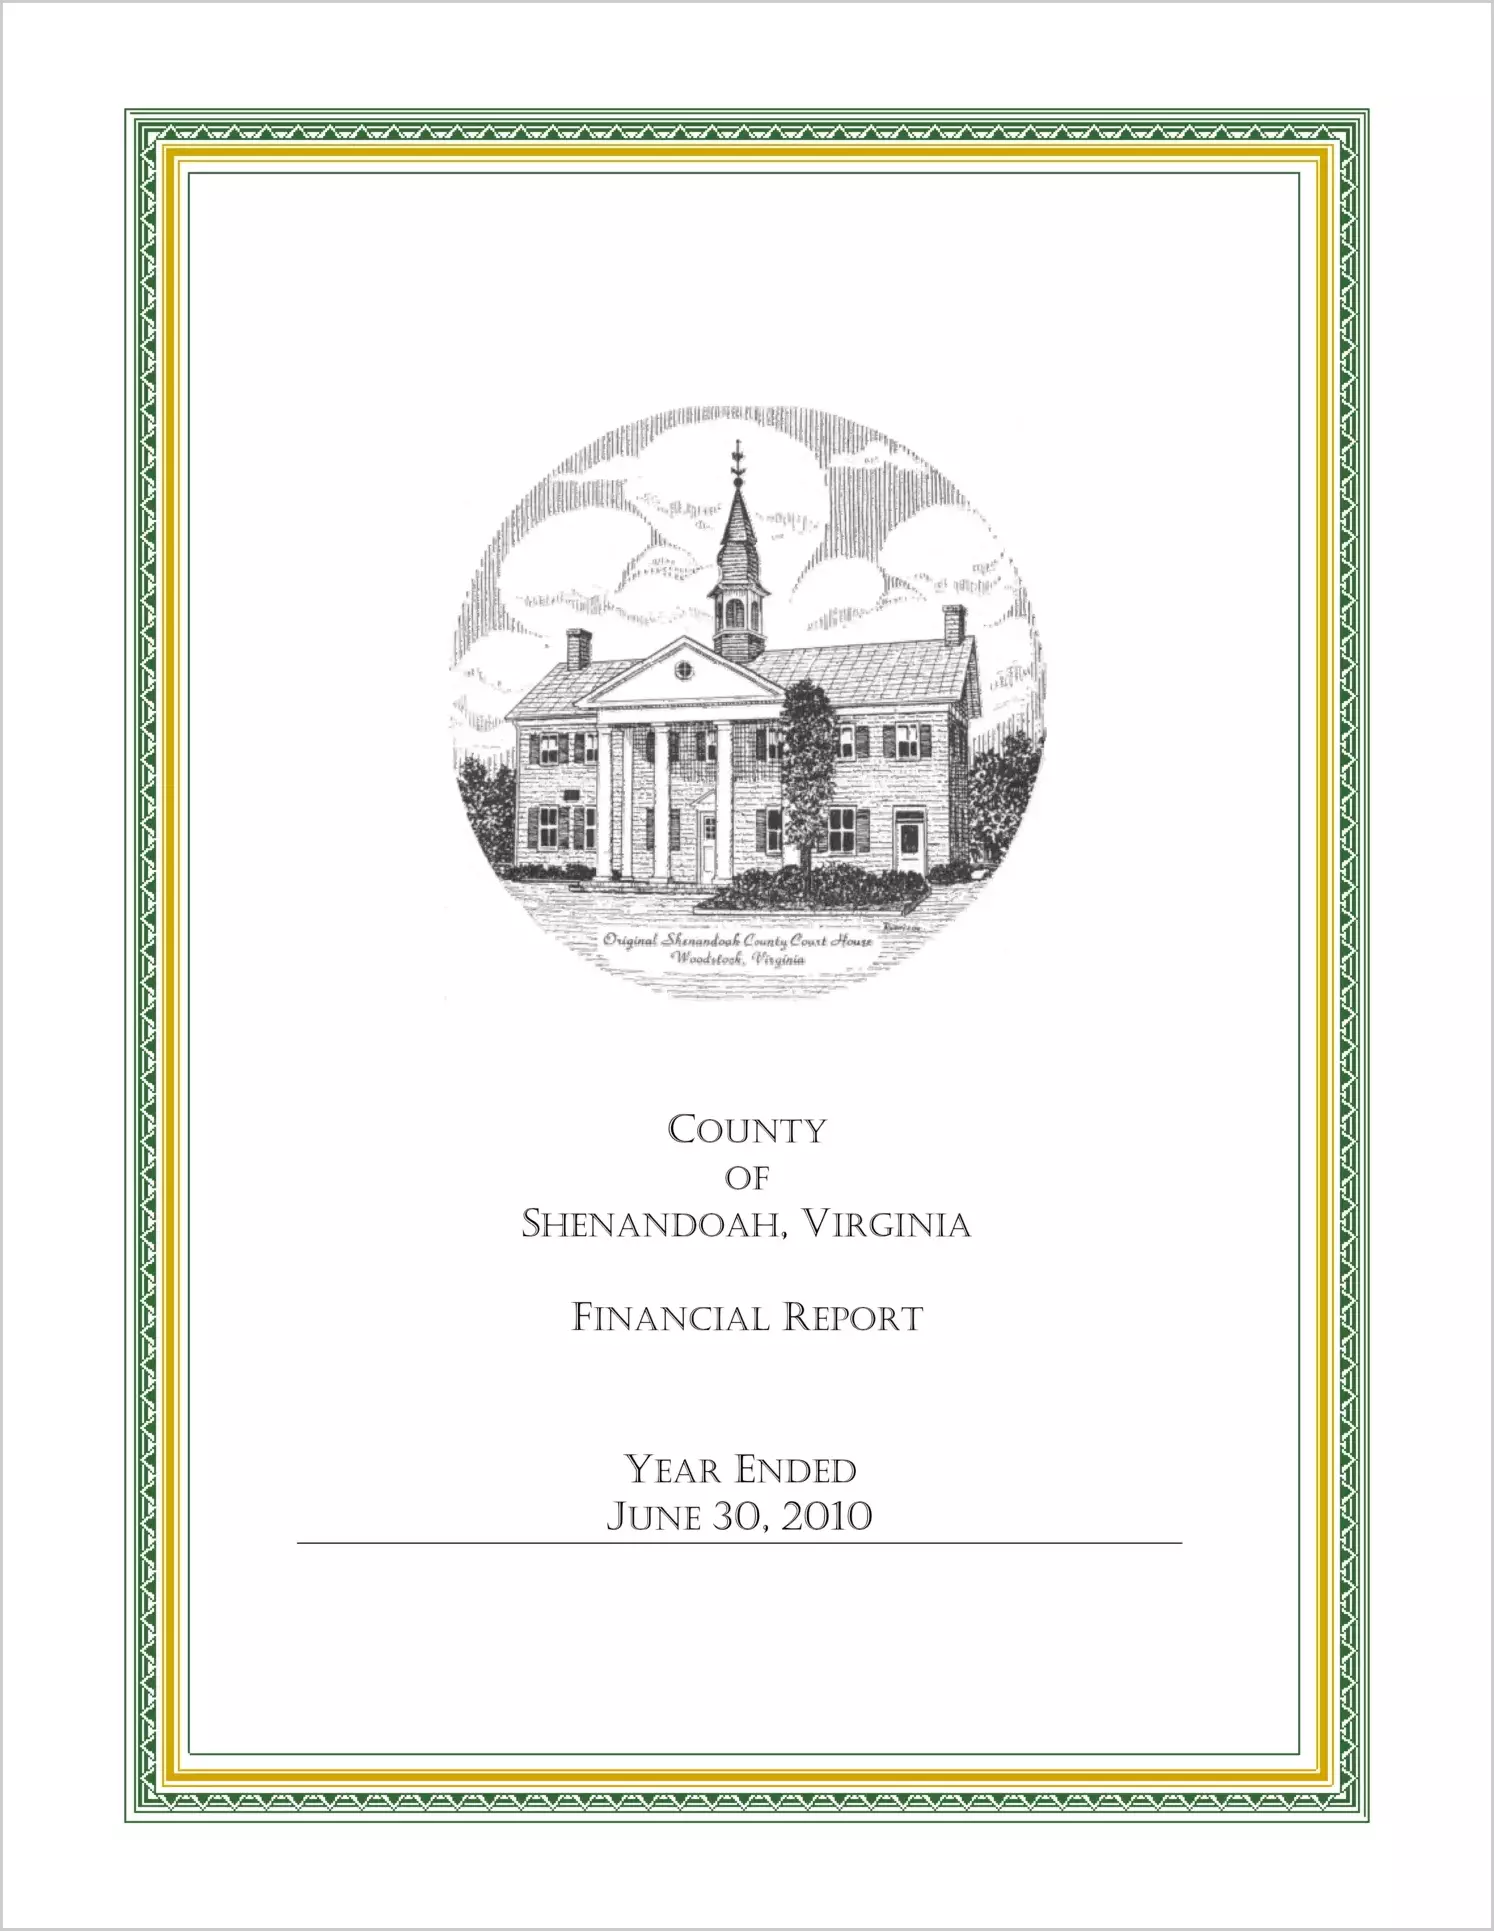 2010 Annual Financial Report for County of Shenandoah